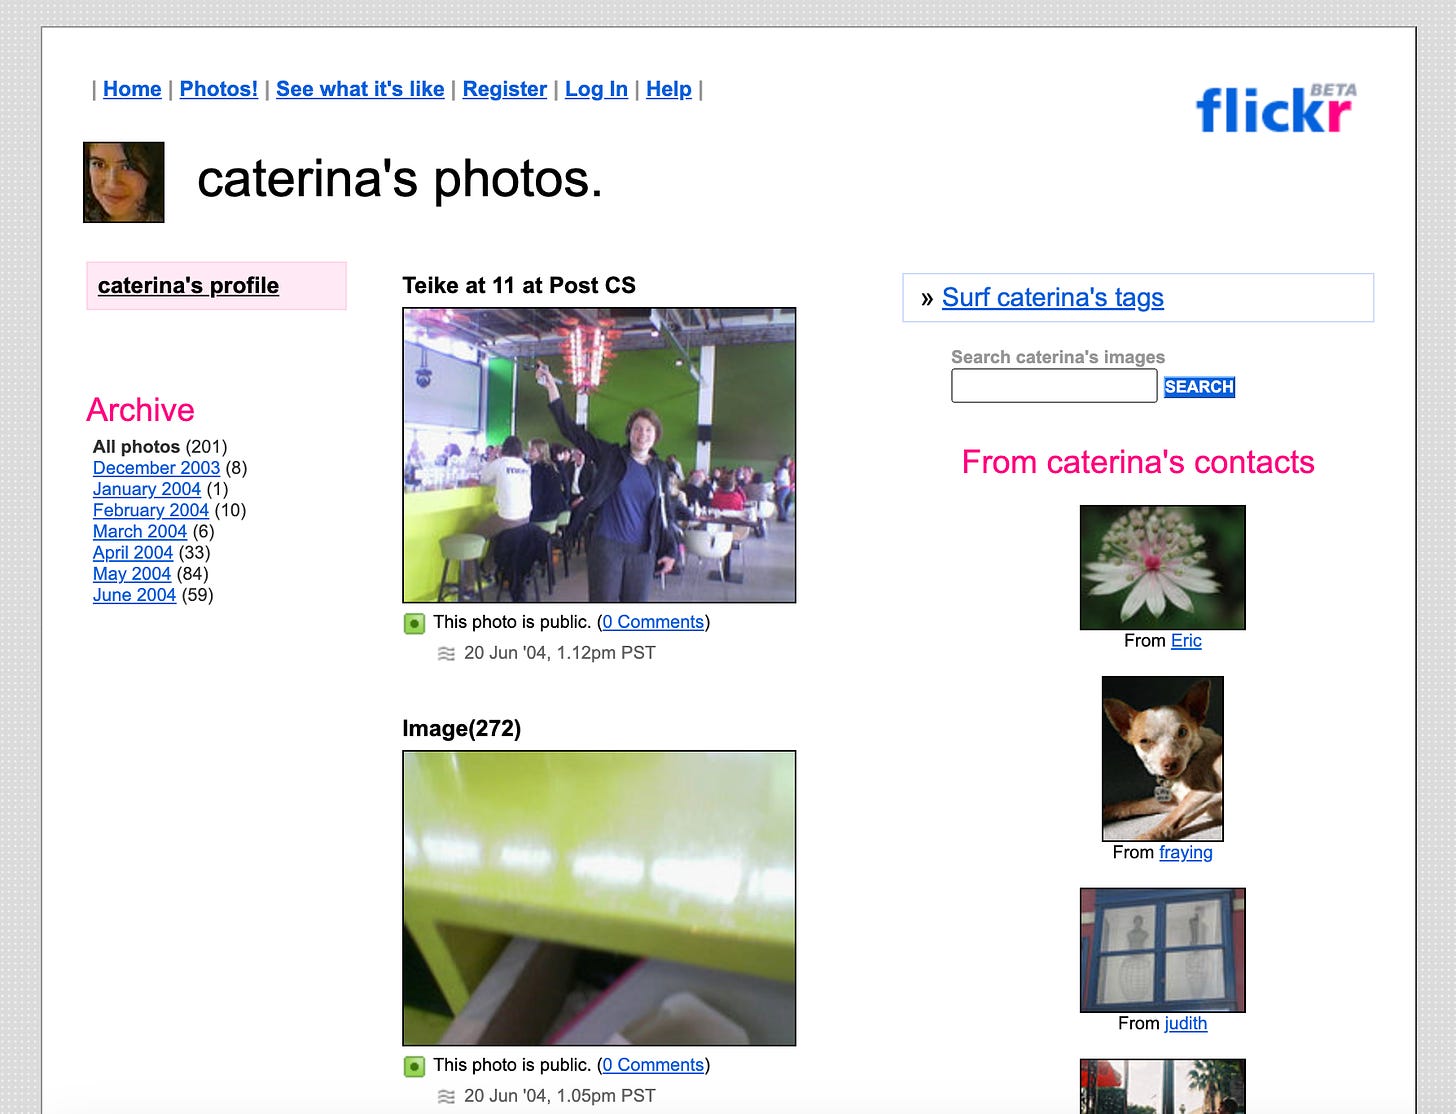 Flickr co-founder Caterina Fake’s Flickr homepage, June 2004